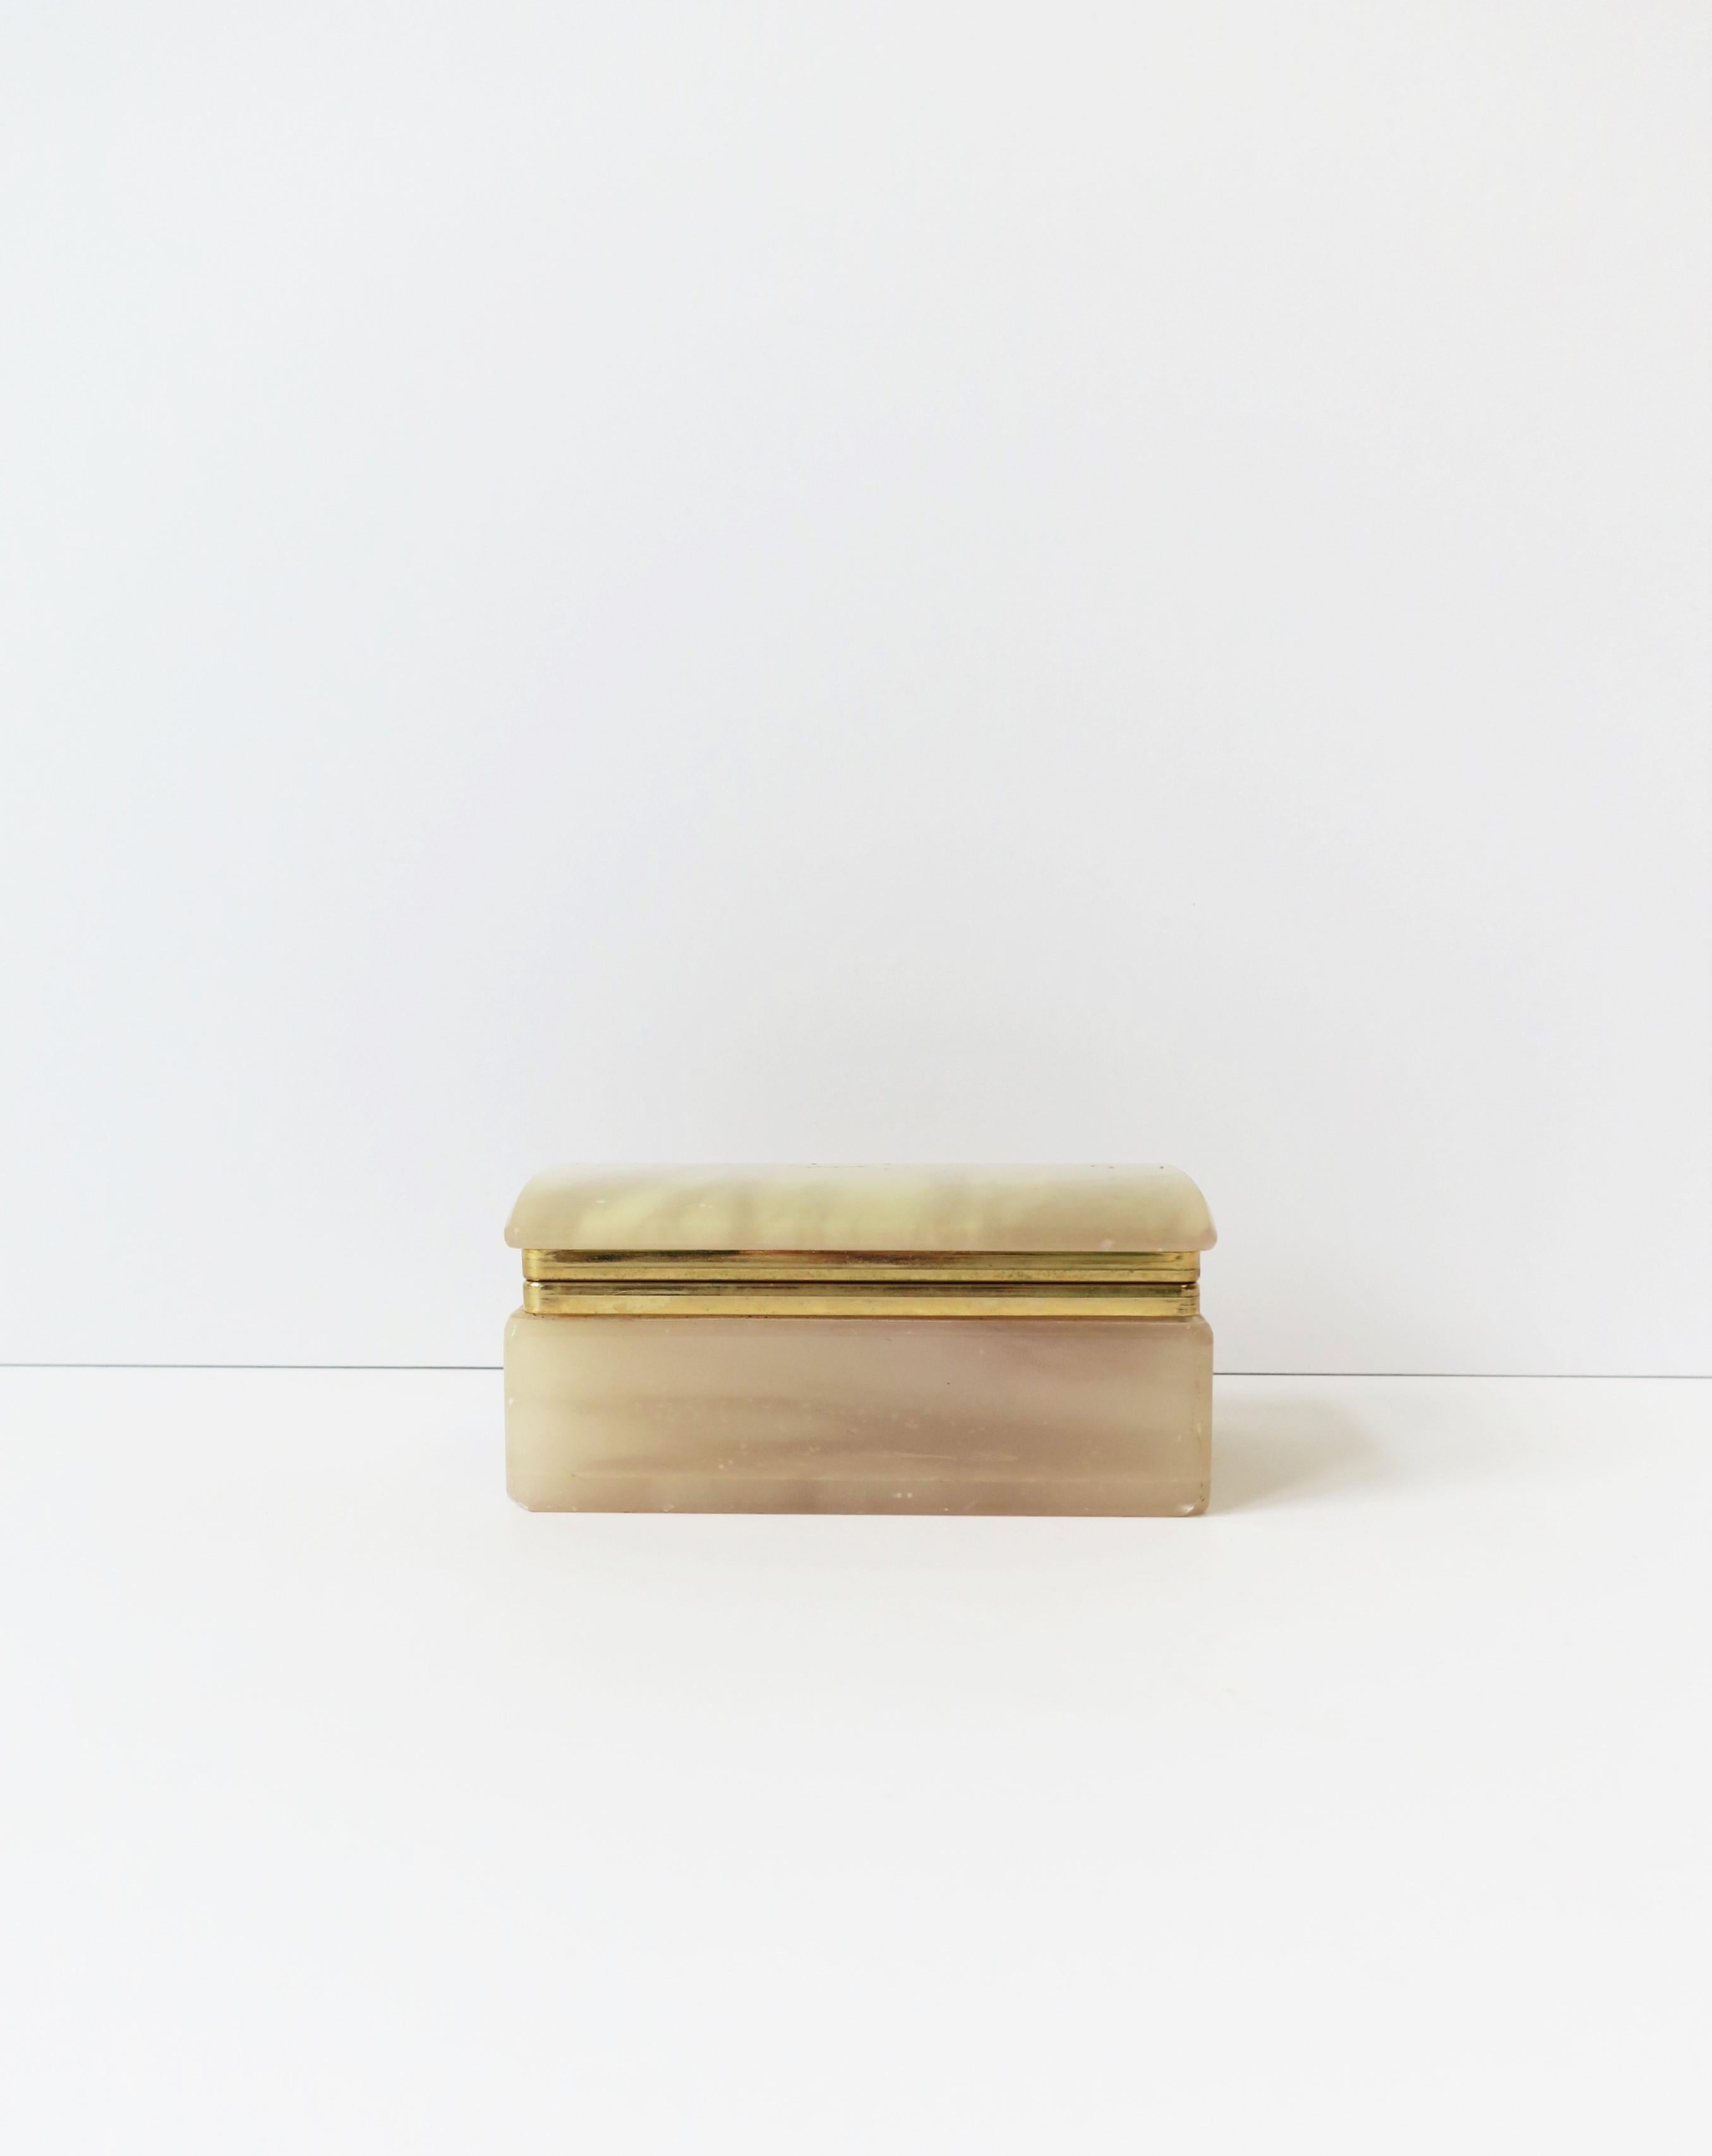 An onyx and brass plated rectangular box, circa late-20th century. A great piece for jewelry or other small items on a dresser, vanity, nightstand table, closet, desk, etc. Dimensions: 2.75